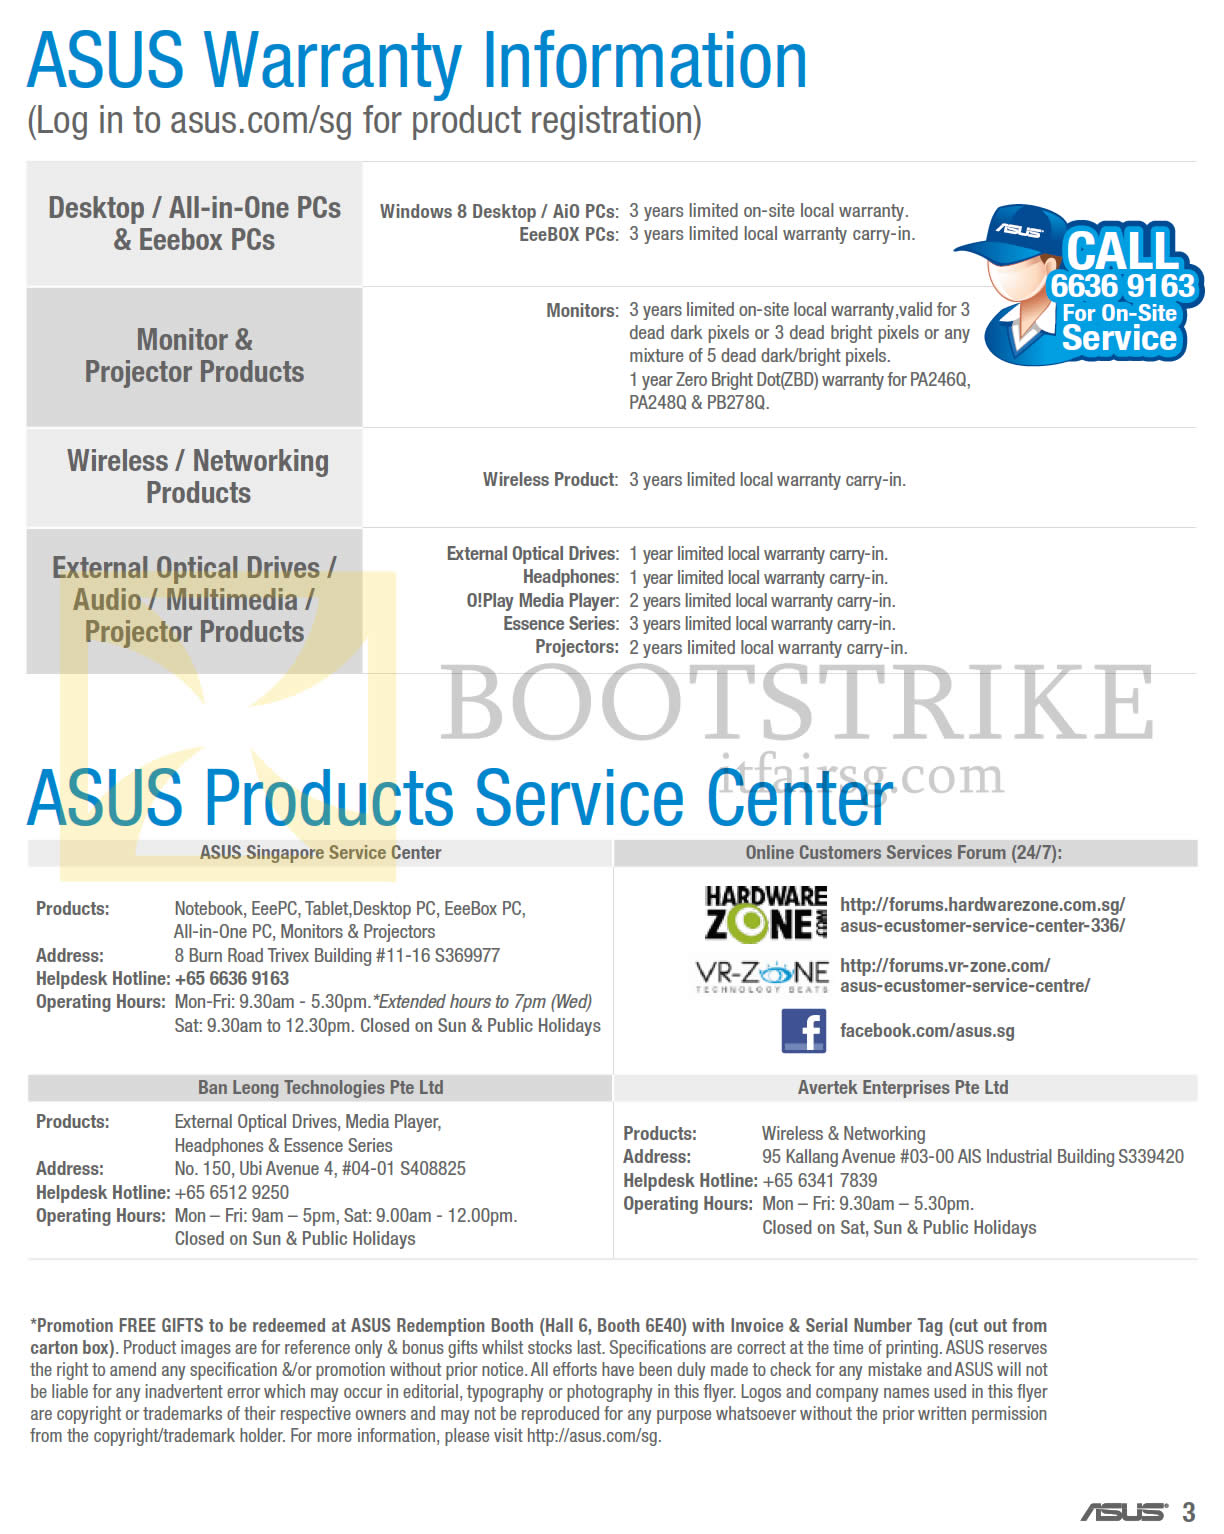 SITEX 2013 price list image brochure of ASUS Warranty Information, Products Service Centre